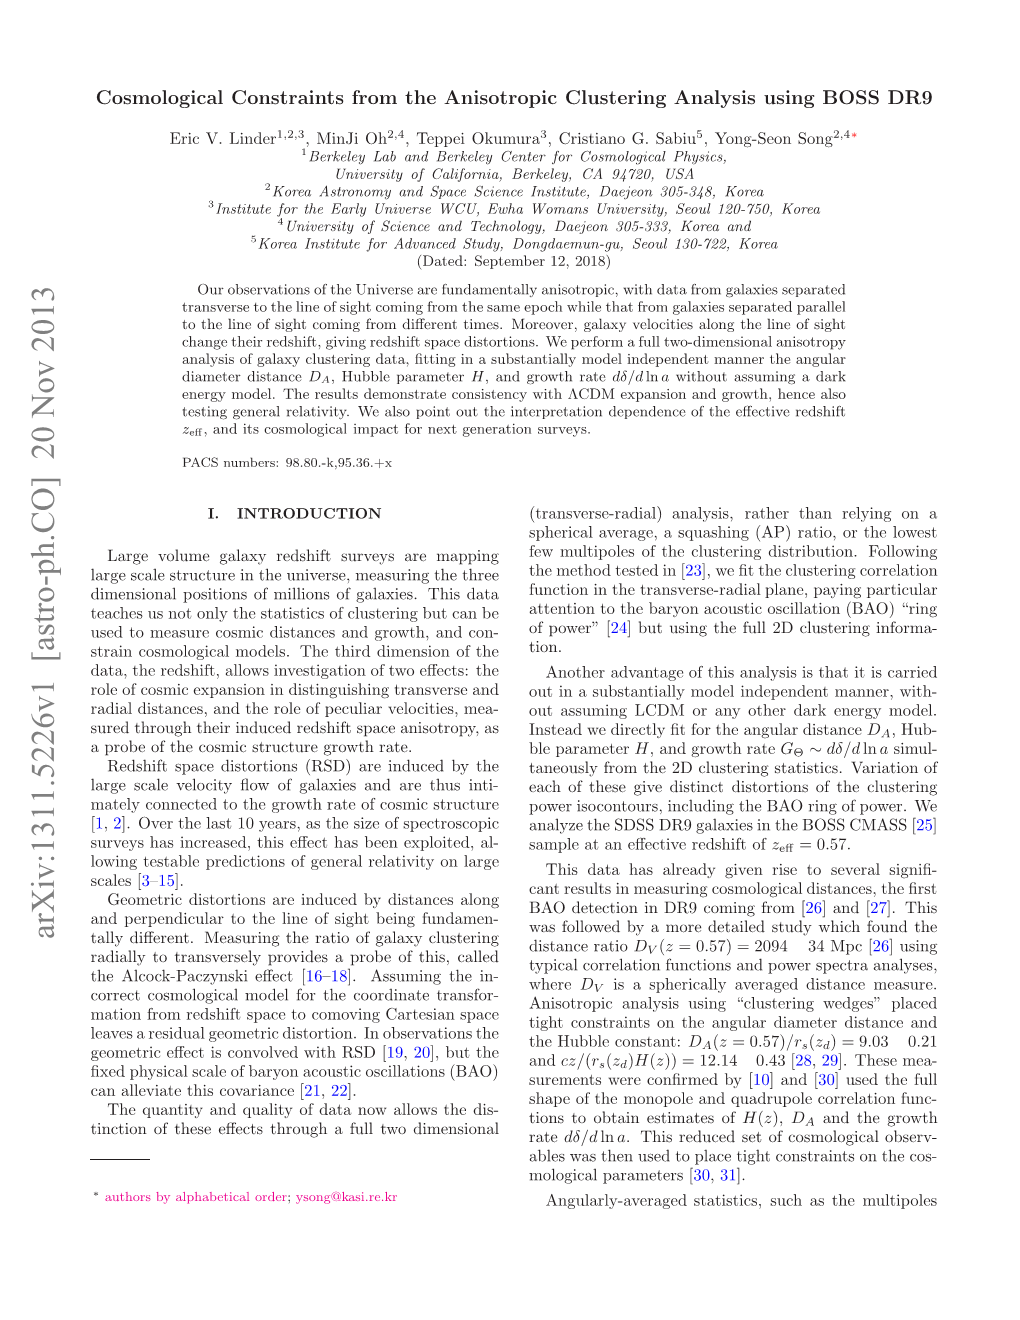 Cosmological Constraints from the Anisotropic Clustering Analysis Using BOSS